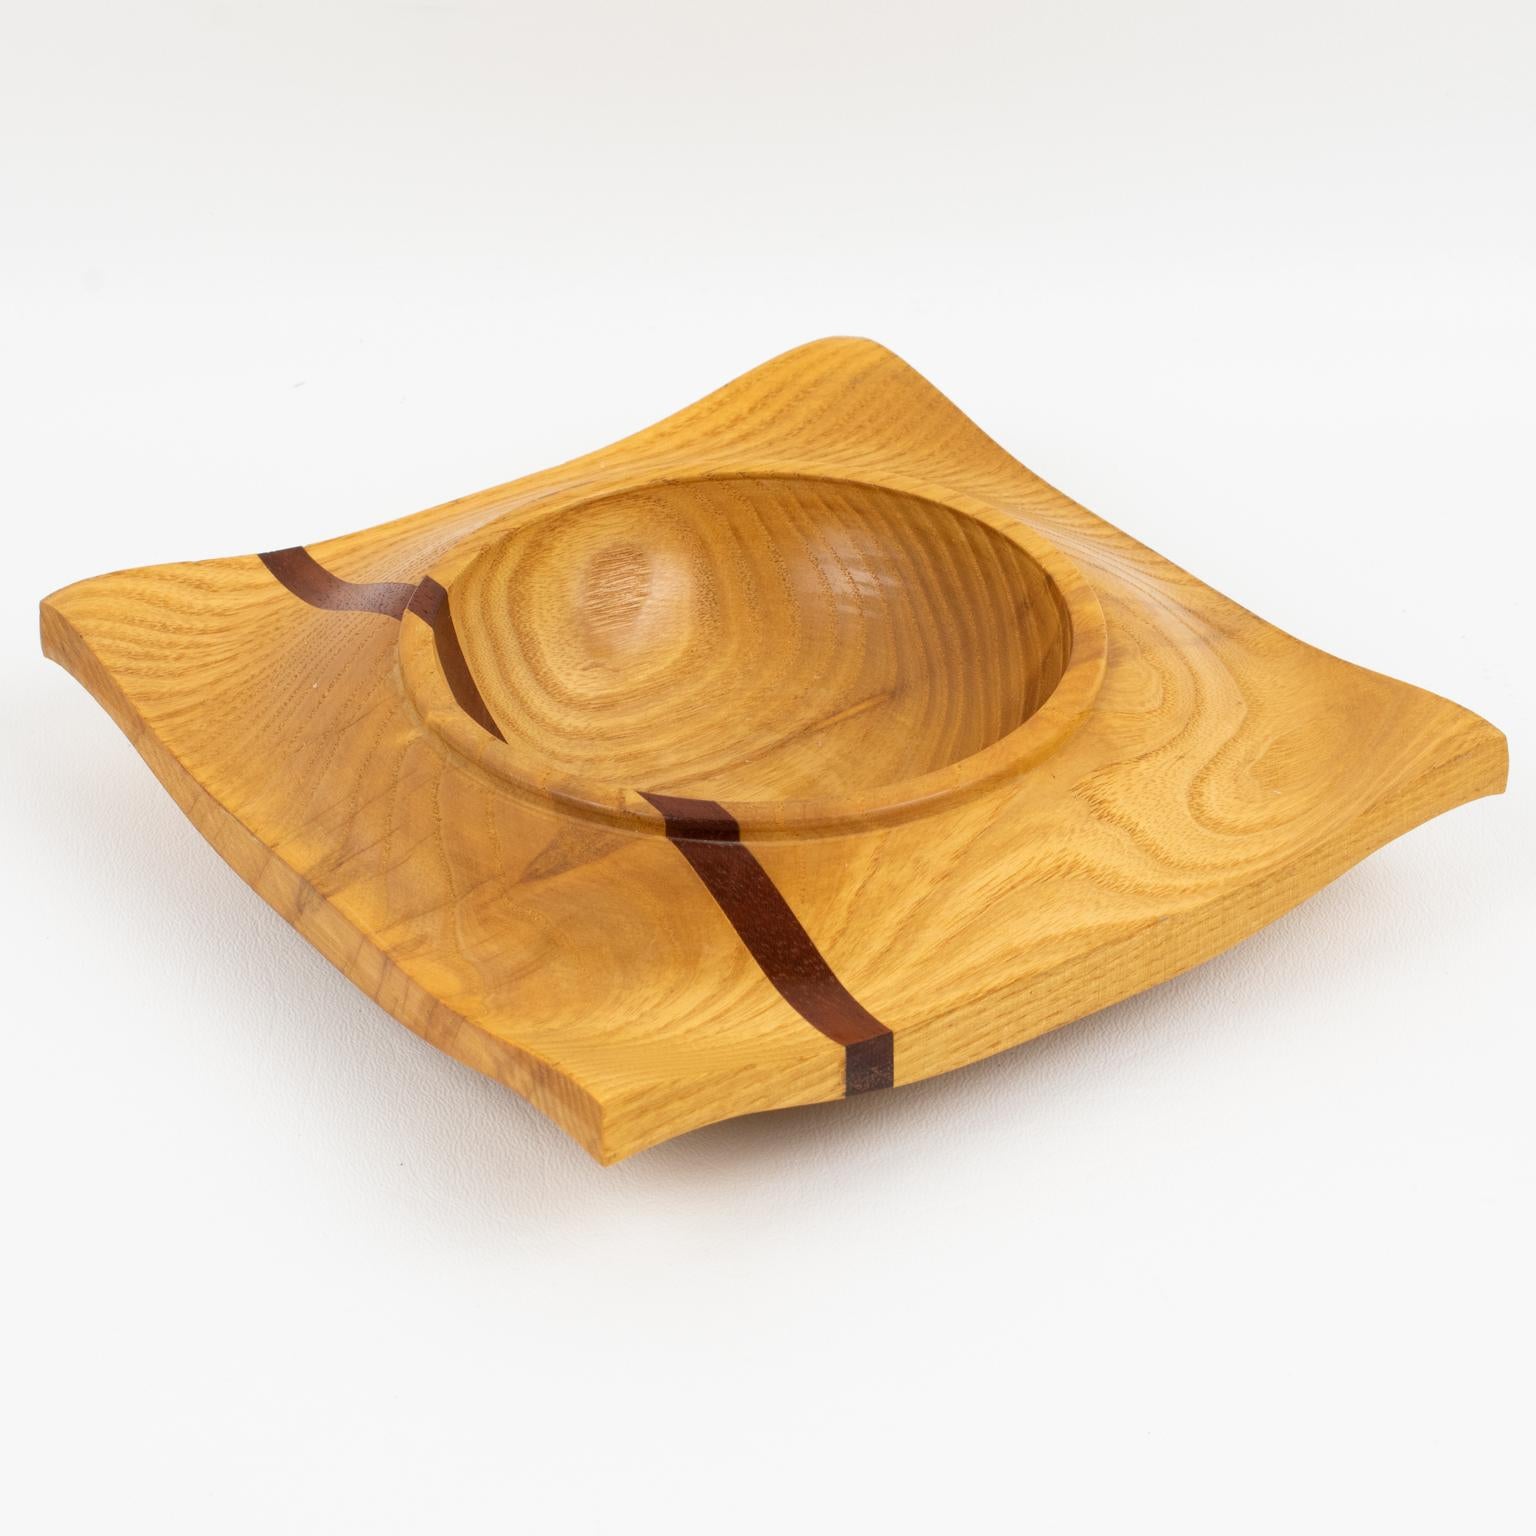 This exquisite modernist Space Age Danish carved bowl, catchall, or desk accessory boasts lovely wood marquetry. This vide poche has a geometric wavy shape with a typical spatial ship design with different woods in fine grain and mixing tropical